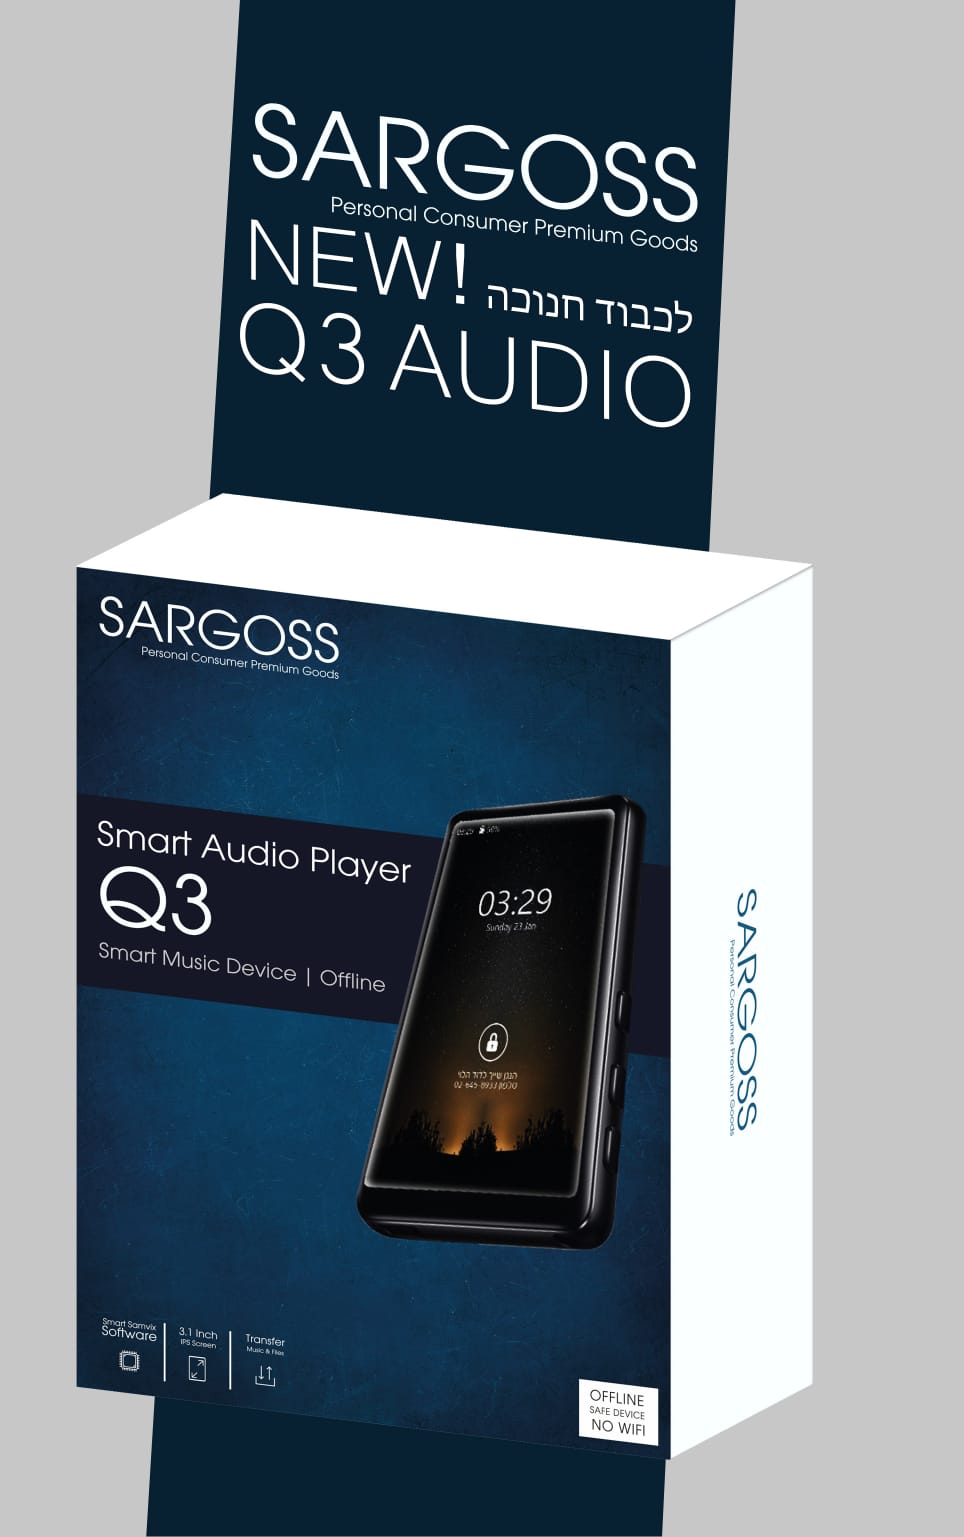 Samvix SmartBass Q3 Kosher Bluetooth 5.0, 8GB Built in Memory, Bluetooth, Rename files,TransferQ3 to Q3 MP3 Player 1.5x3, No Radio, No Wifi, No Pictures, No Videos, Copy and Paste, With Sefarim, Siddur and Tehillim, Built in Speaker, msd up 256GB -Black